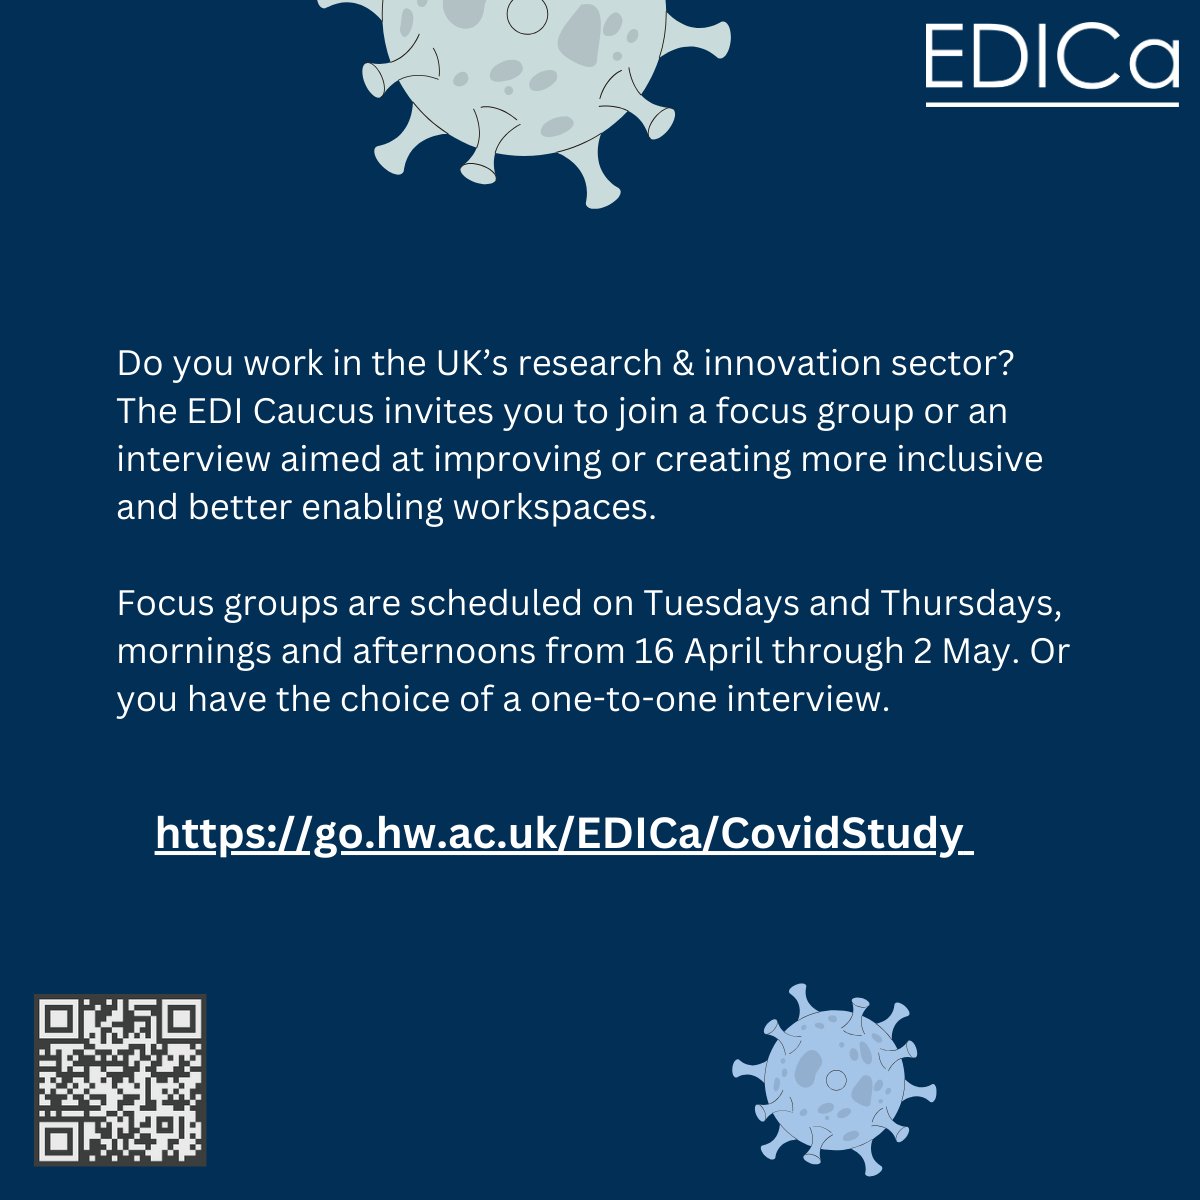 CALL FOR PARTICIPANTS - pls share What does a more inclusive, enabling workspace look like in a post-Covid research & innovation sector? EDICa invites anyone working in UK's sector to participate in focus groups or interviews. For info & sign up edicaucus.ac.uk/covid-study/